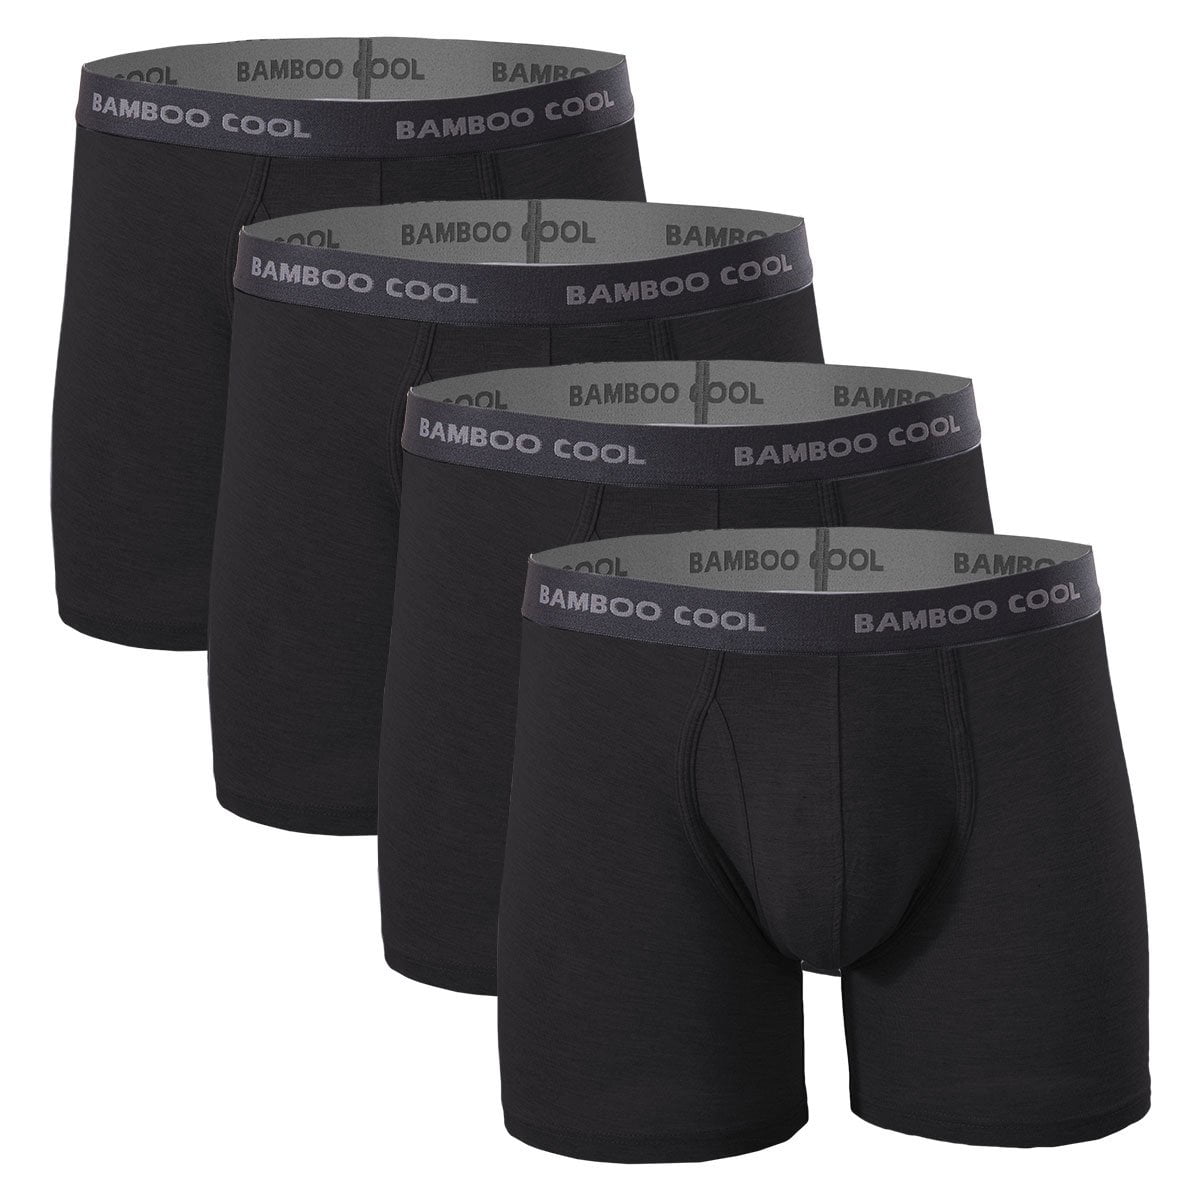 Men's Hip Underwear Men's Bamboo Fiber Viscose Multipack Boxer Briefs,  Comfortable And Breathable Underwear With Support Pockets, Quick-drying  Travel